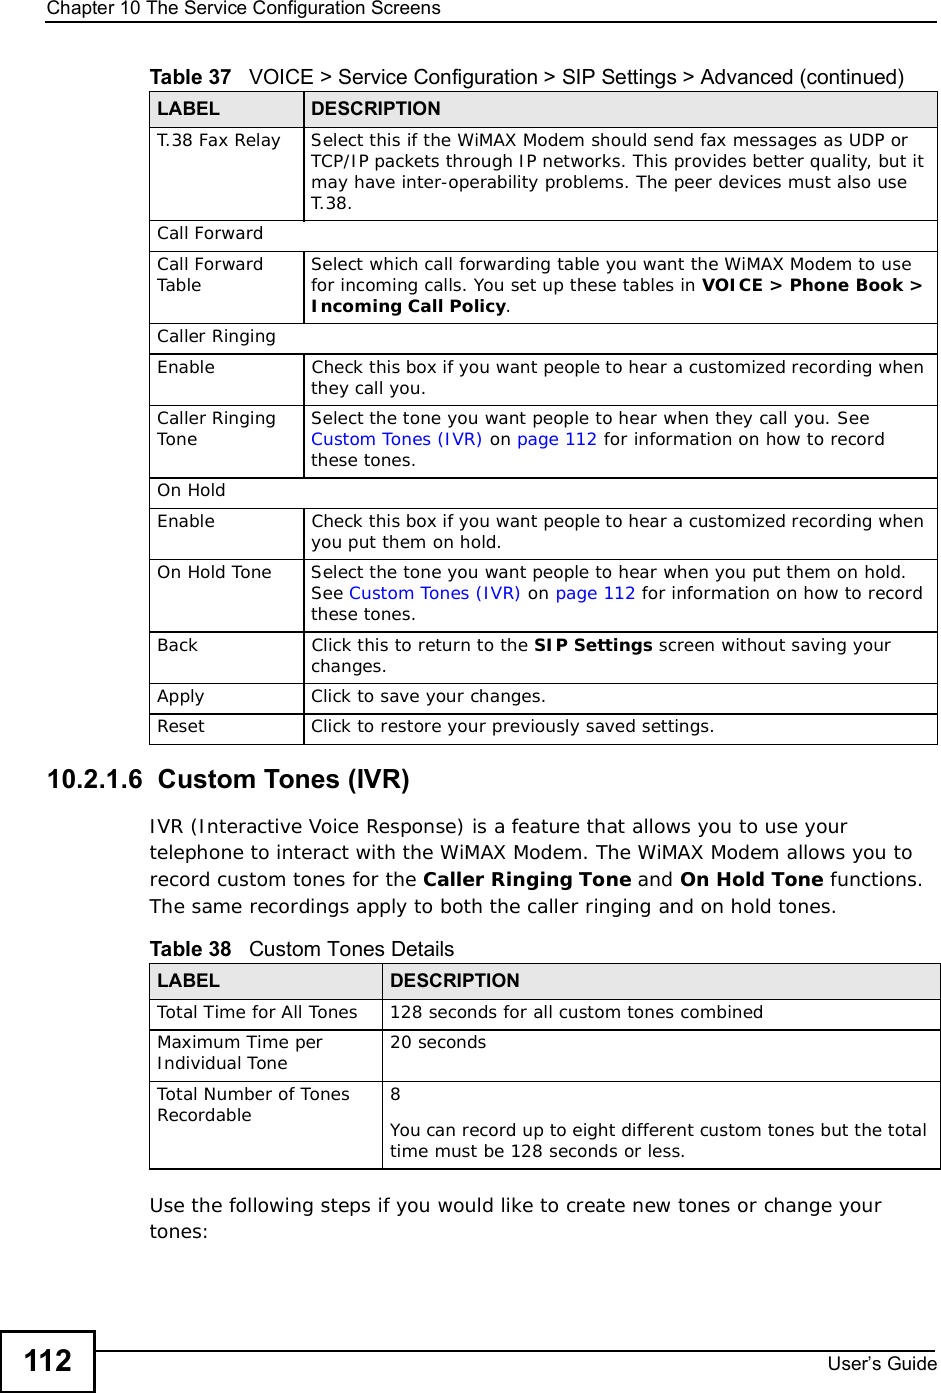 Chapter 10The Service Configuration ScreensUser s Guide11210.2.1.6  Custom Tones (IVR)IVR (Interactive Voice Response) is a feature that allows you to use your telephone to interact with the WiMAX Modem. The WiMAX Modem allows you to record custom tones for the Caller Ringing Tone and On Hold Tone functions. The same recordings apply to both the caller ringing and on hold tones. Use the following steps if you would like to create new tones or change your tones: T.38 Fax RelaySelect this if the WiMAX Modem should send fax messages as UDP or TCP/IP packets through IP networks. This provides better quality, but it may have inter-operability problems. The peer devices must also use T.38.Call ForwardCall Forward Table Select which call forwarding table you want the WiMAX Modem to use for incoming calls. You set up these tables in VOICE &gt; Phone Book &gt; Incoming Call Policy.Caller RingingEnableCheck this box if you want people to hear a customized recording when they call you. Caller Ringing Tone Select the tone you want people to hear when they call you. See Custom Tones (IVR) on page112 for information on how to record these tones.On HoldEnableCheck this box if you want people to hear a customized recording when you put them on hold. On Hold ToneSelect the tone you want people to hear when you put them on hold. See Custom Tones (IVR) on page112 for information on how to record these tones.BackClick this to return to the SIP Settings screen without saving your changes.Apply Click to save your changes.Reset Click to restore your previously saved settings.Table 37   VOICE &gt; Service Configuration &gt; SIP Settings &gt; Advanced (continued)LABEL DESCRIPTIONTable 38   Custom Tones DetailsLABEL DESCRIPTIONTotal Time for All Tones128 seconds for all custom tones combinedMaximum Time per Individual Tone  20 secondsTotal Number of Tones Recordable 8You can record up to eight different custom tones but the total time must be 128 seconds or less. 